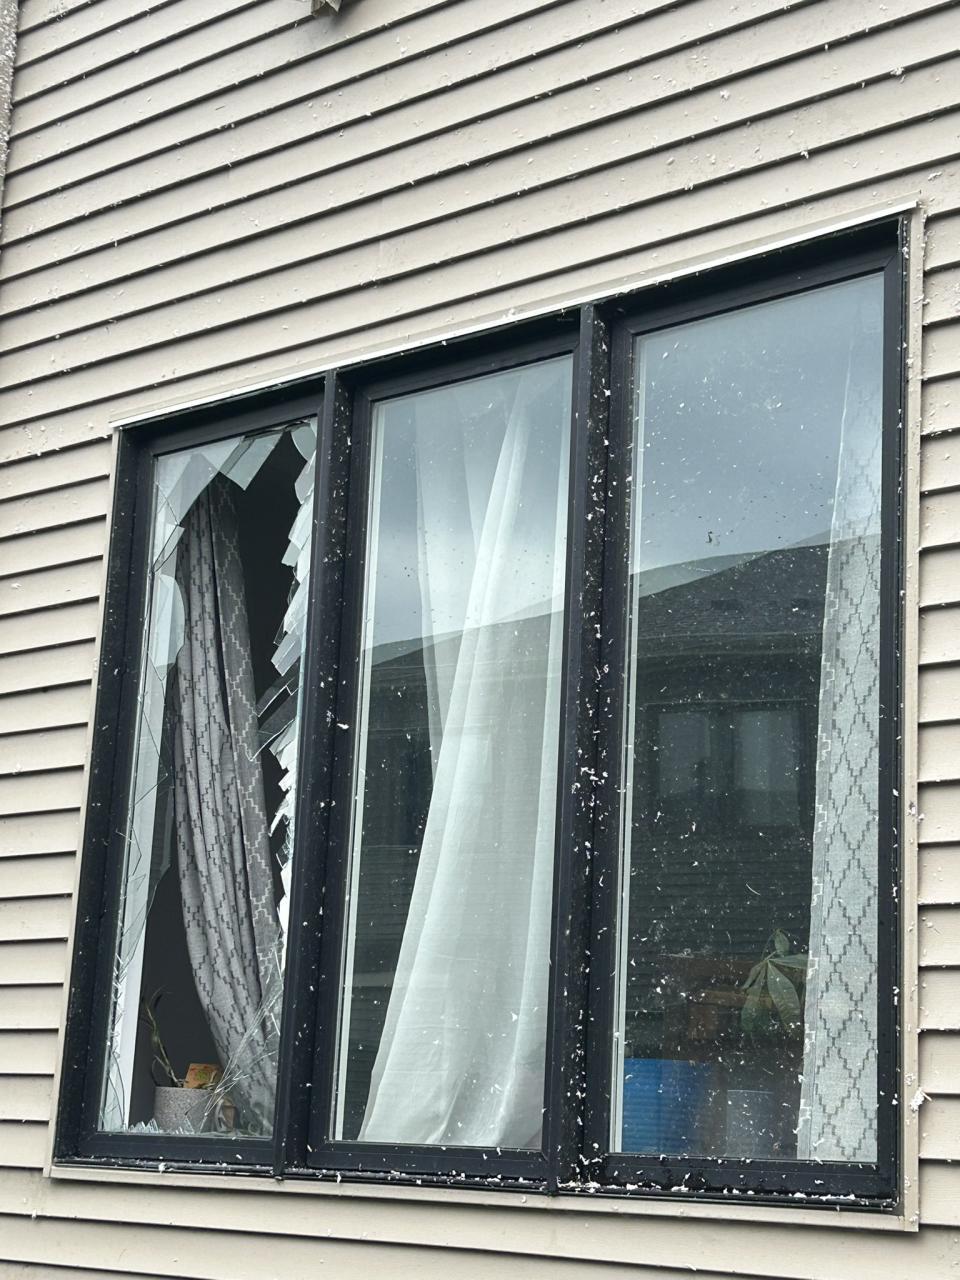 Permission to use: damage photos from barrhaven via Laurie Gillespie on Twitter 1